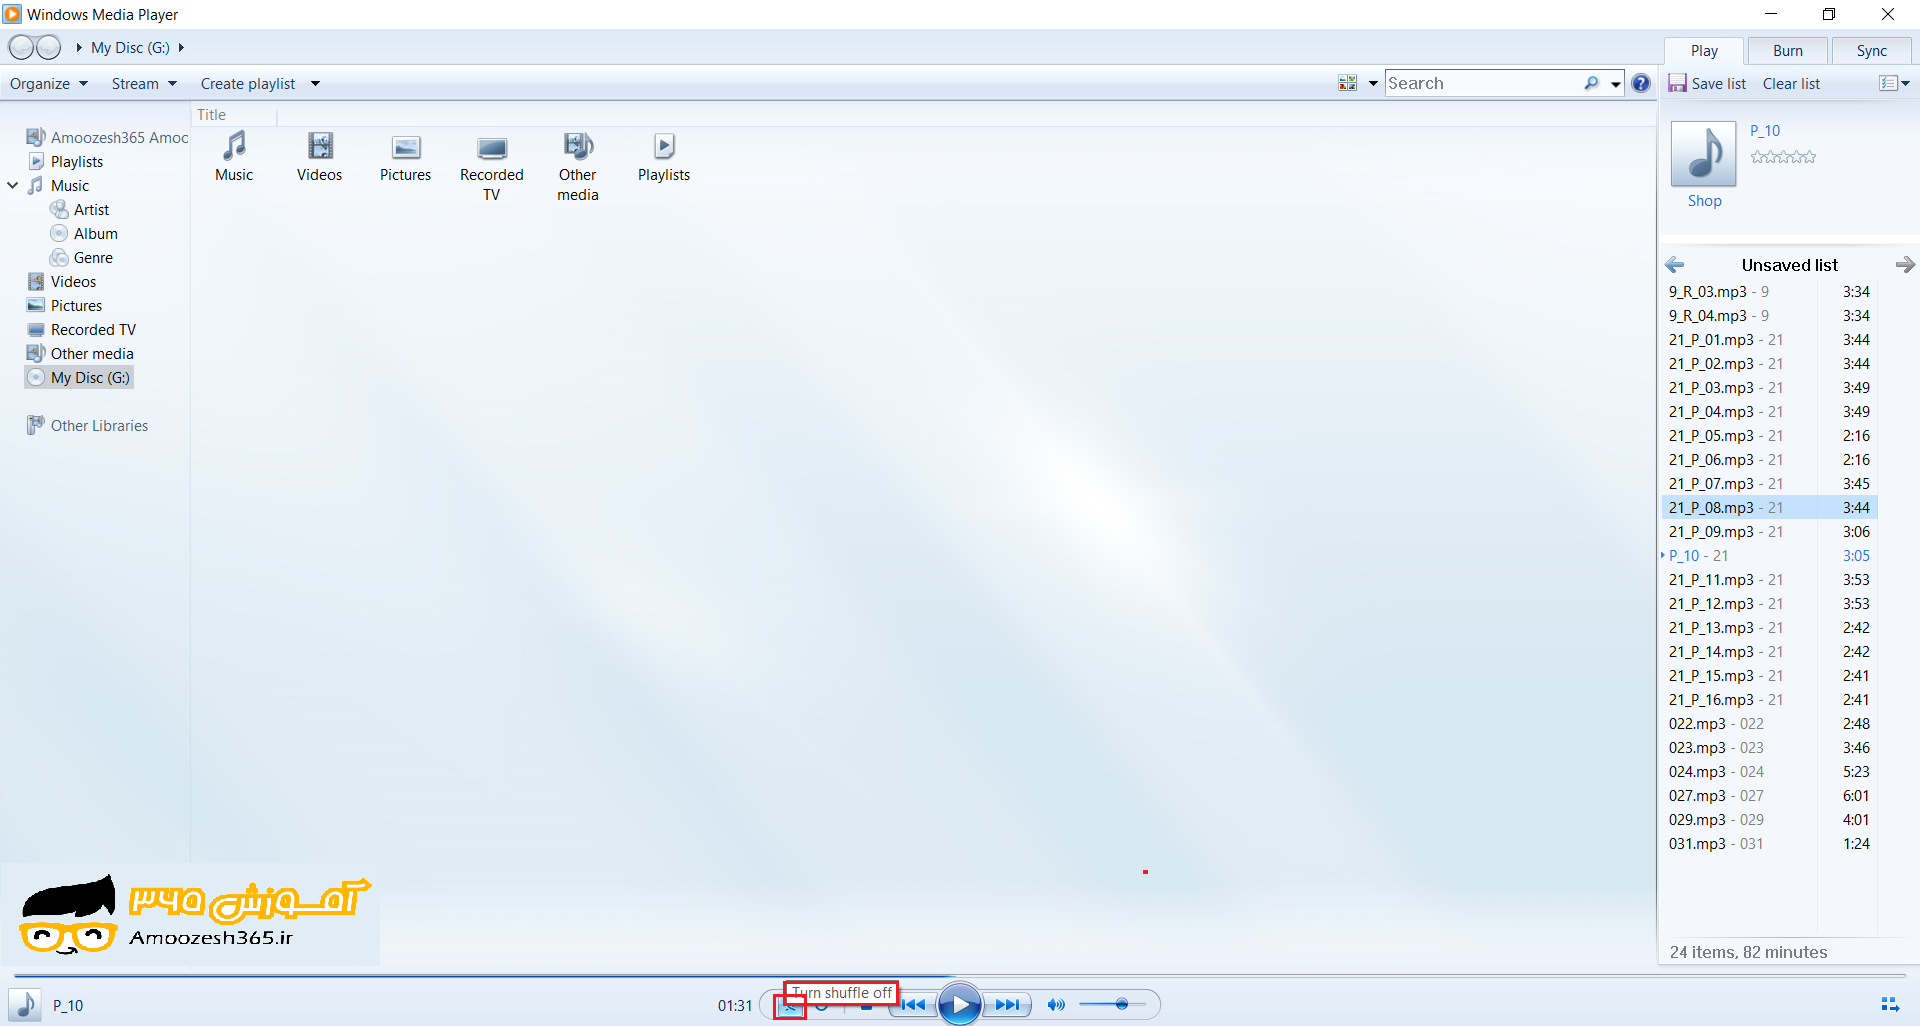 download srt file how to use media player